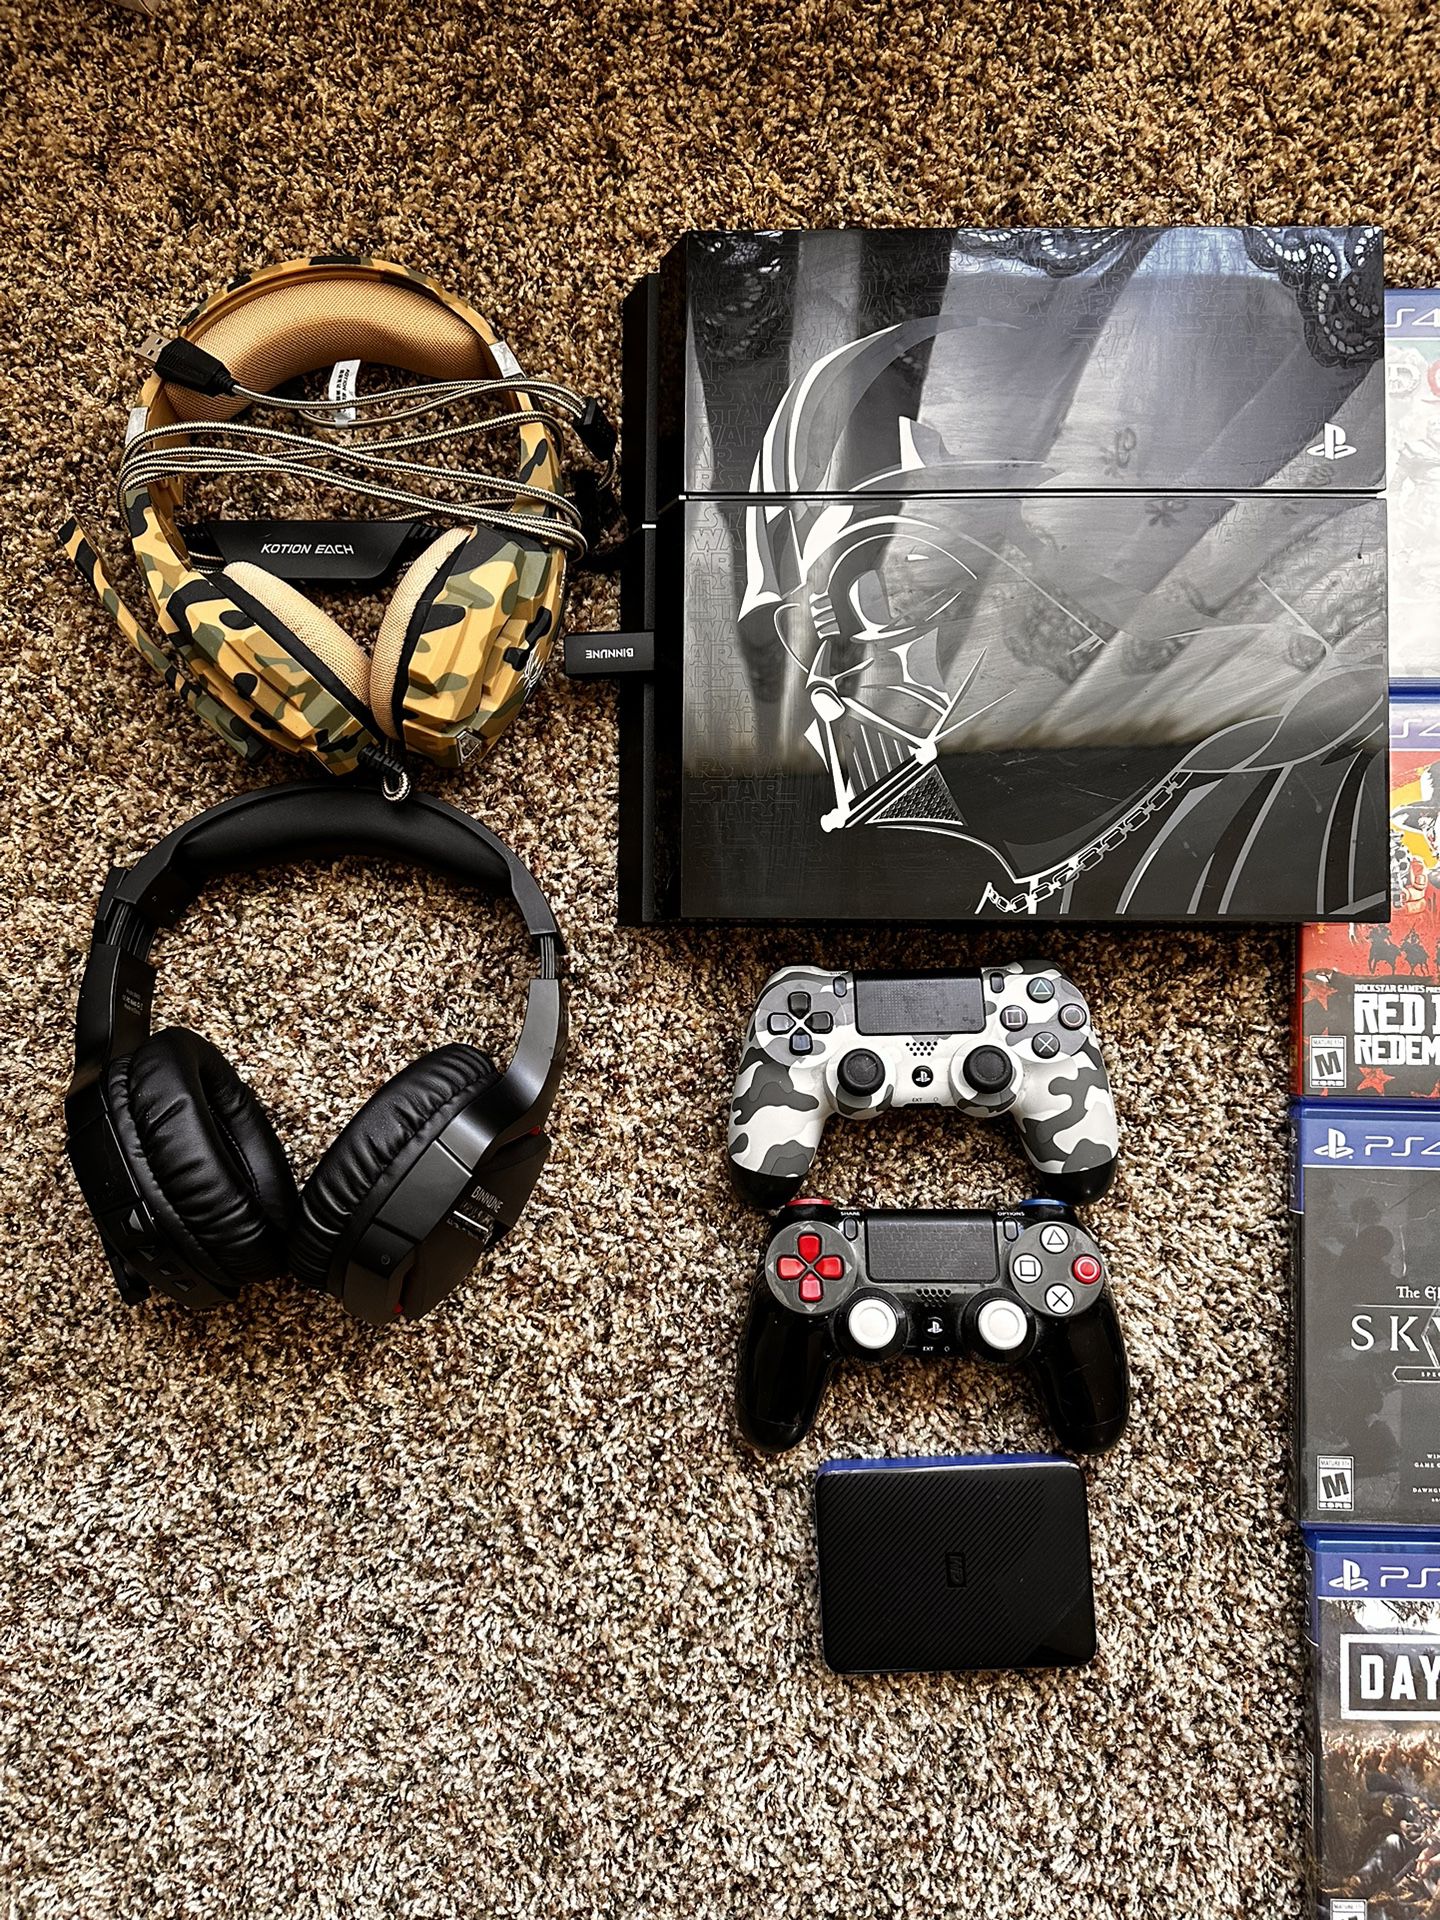 Darth Vader PS4 Console Hard Drive Accessories for Sale in OH -